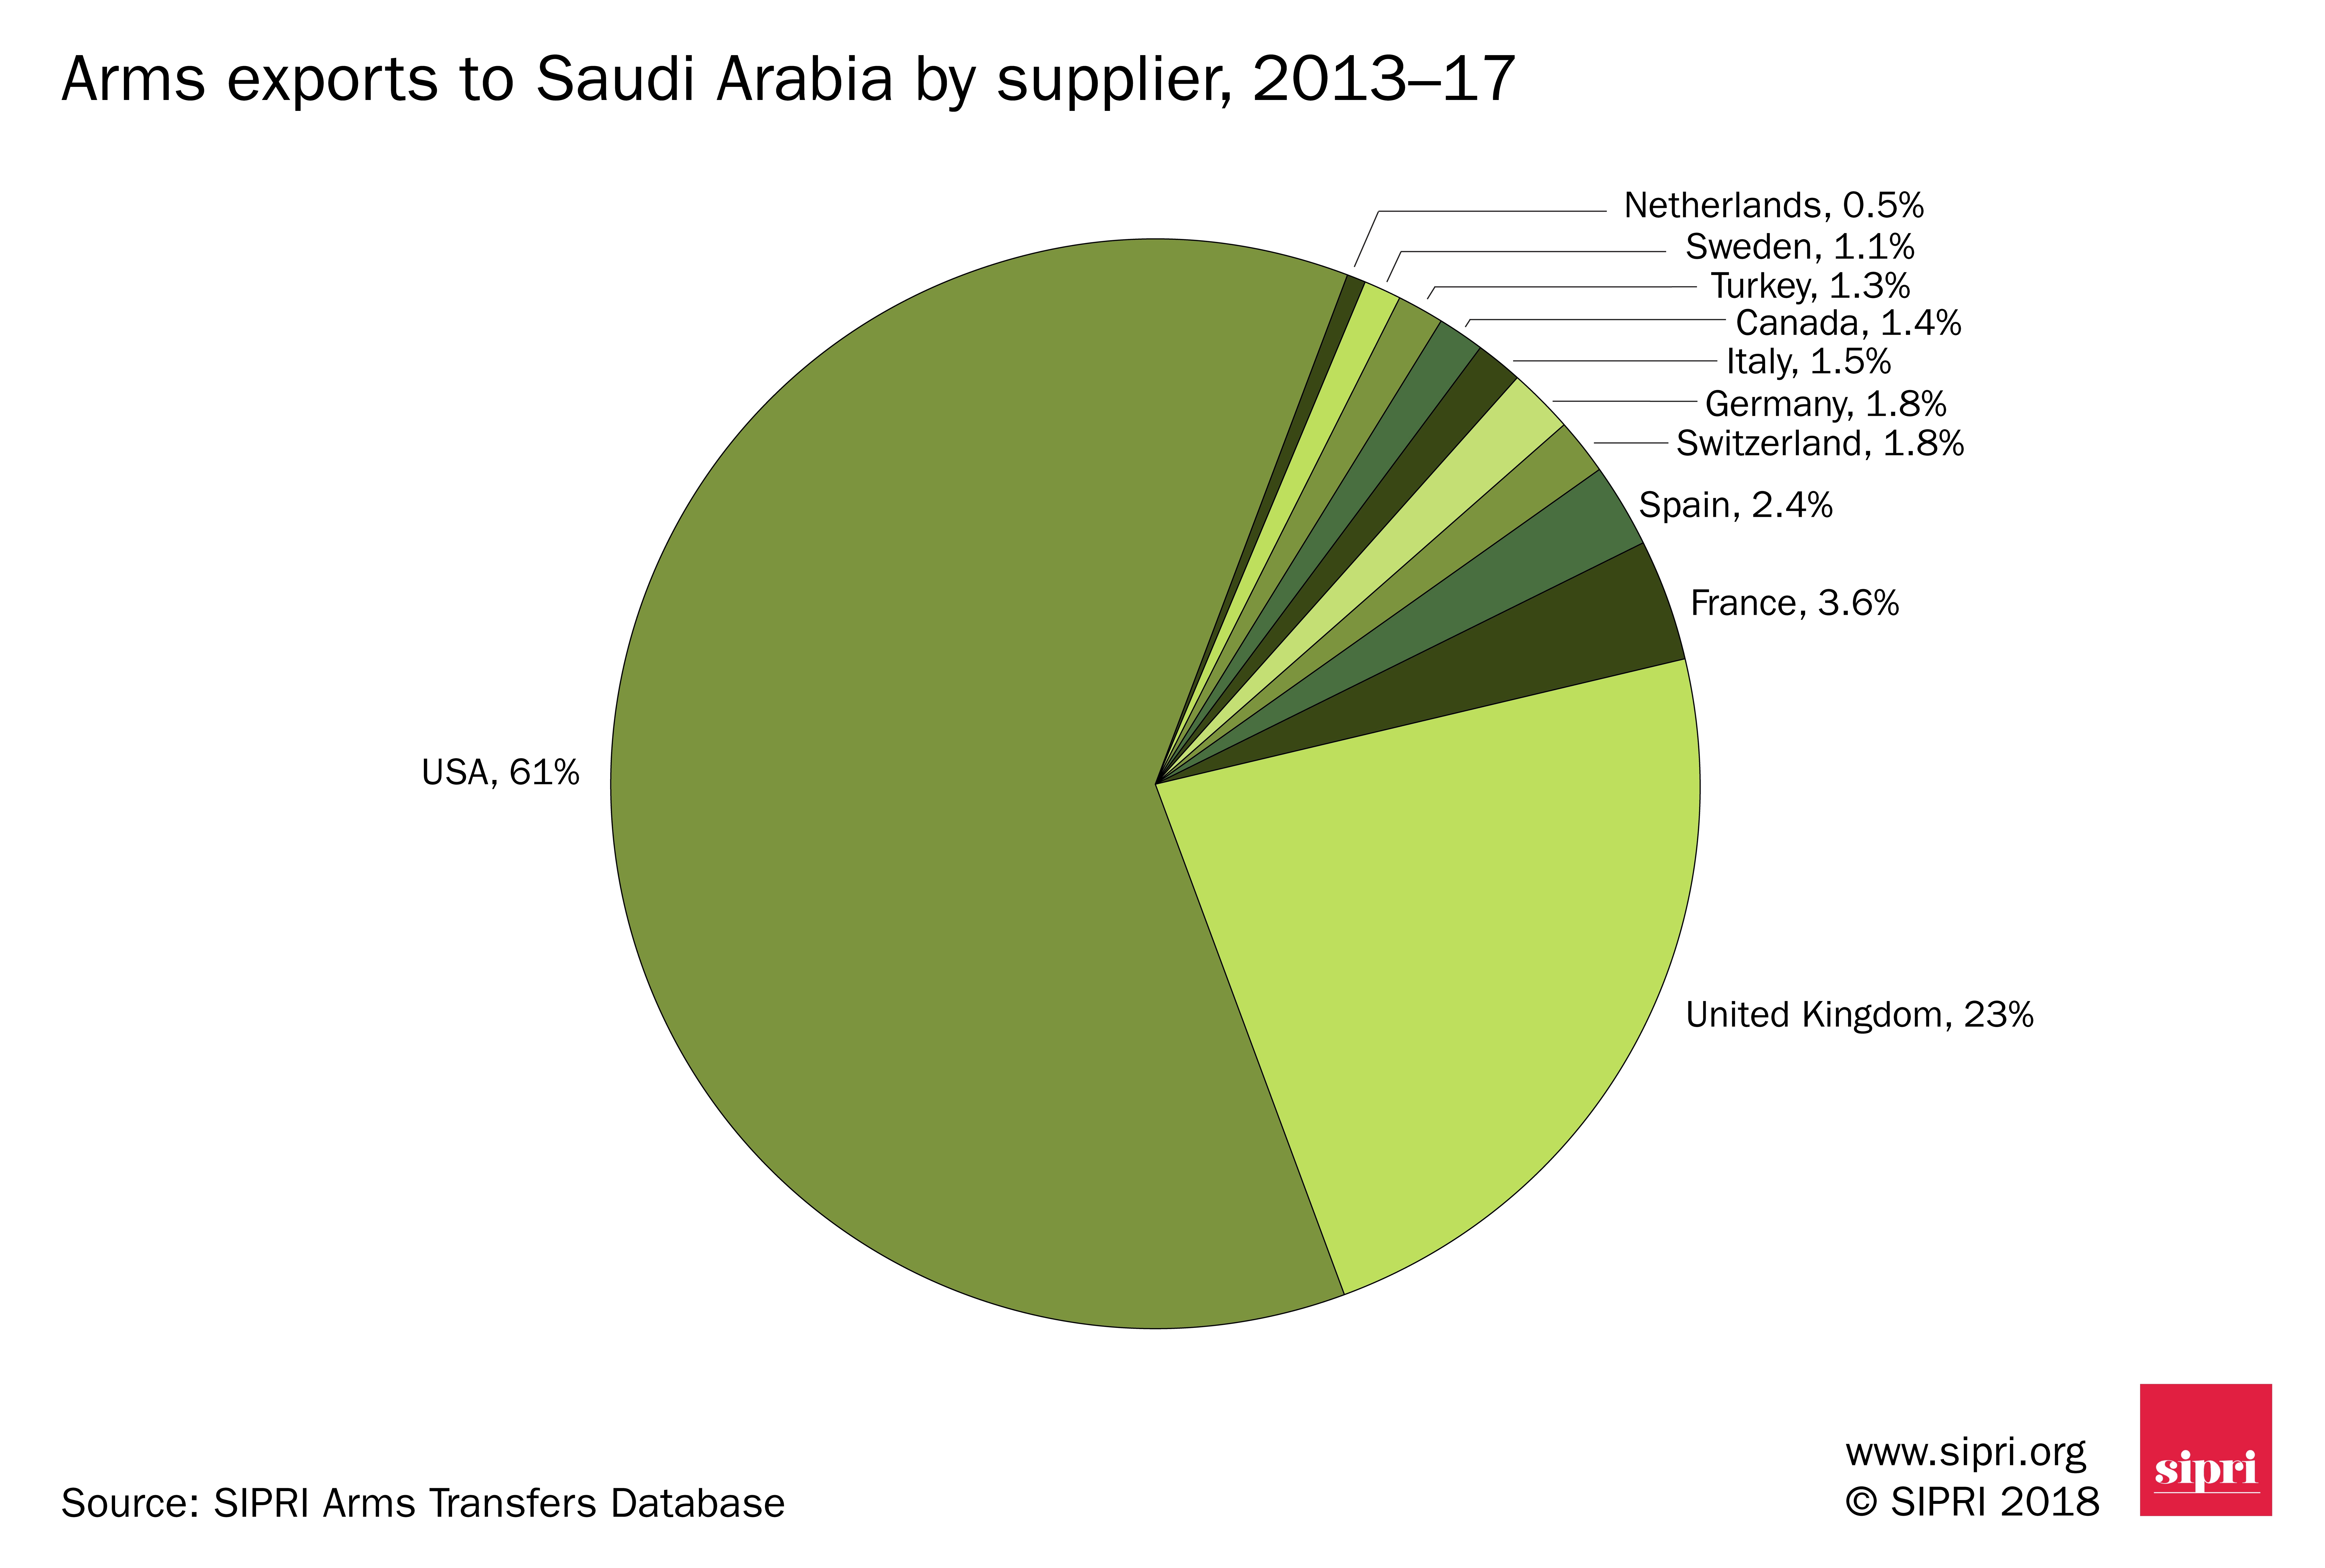 Figure 4. Arms exports to Saudi Arabia by supplier, 2013–17.